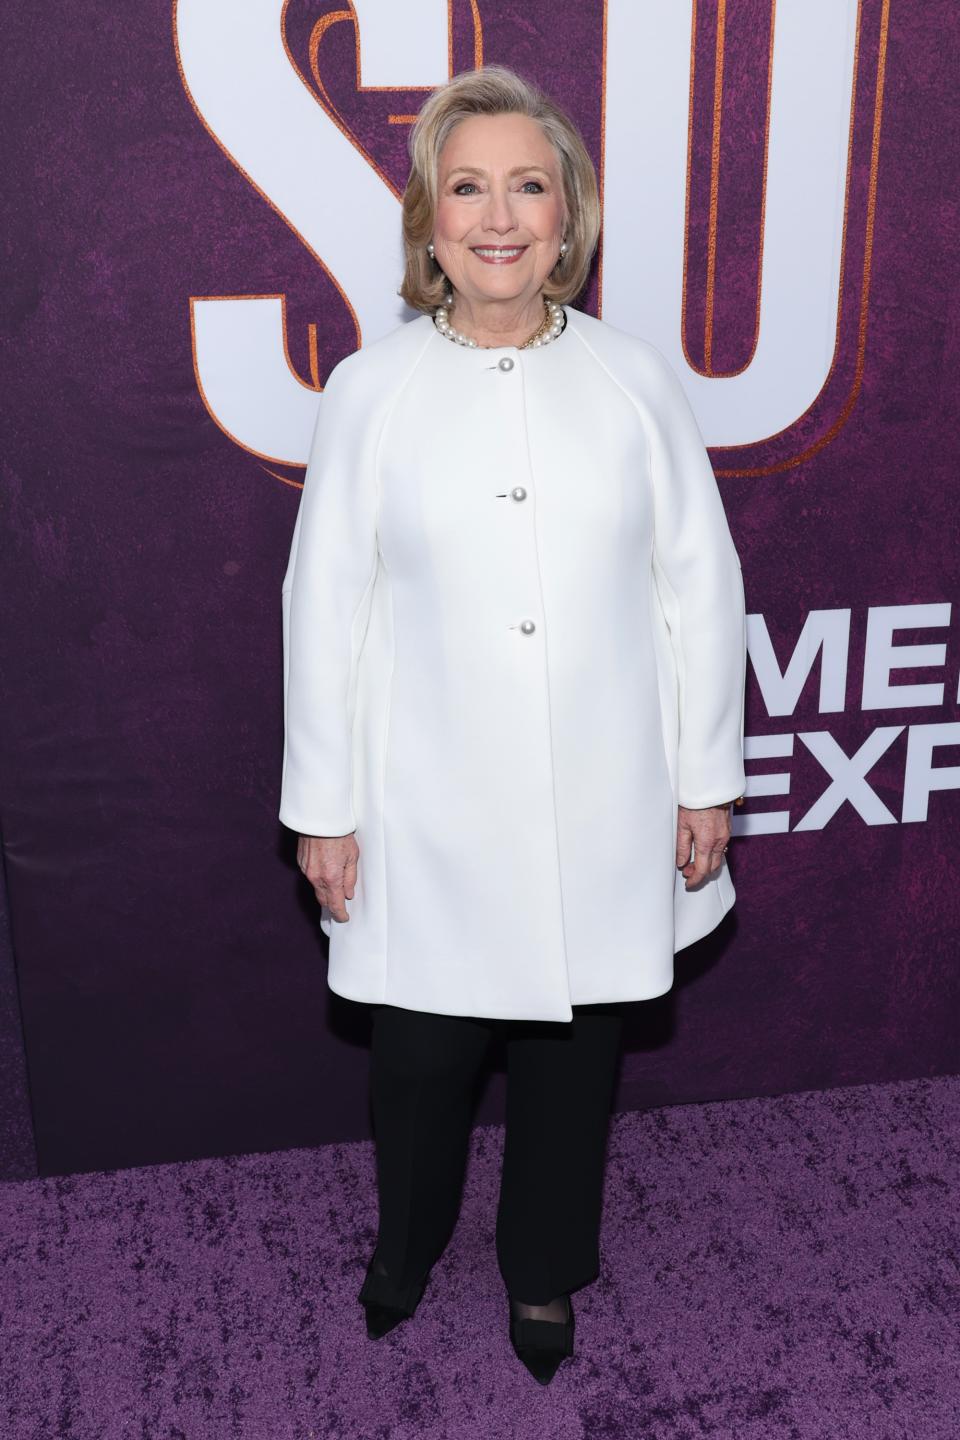 Hillary Clinton at the opening night of "Suffs" on Broadway on April 18.